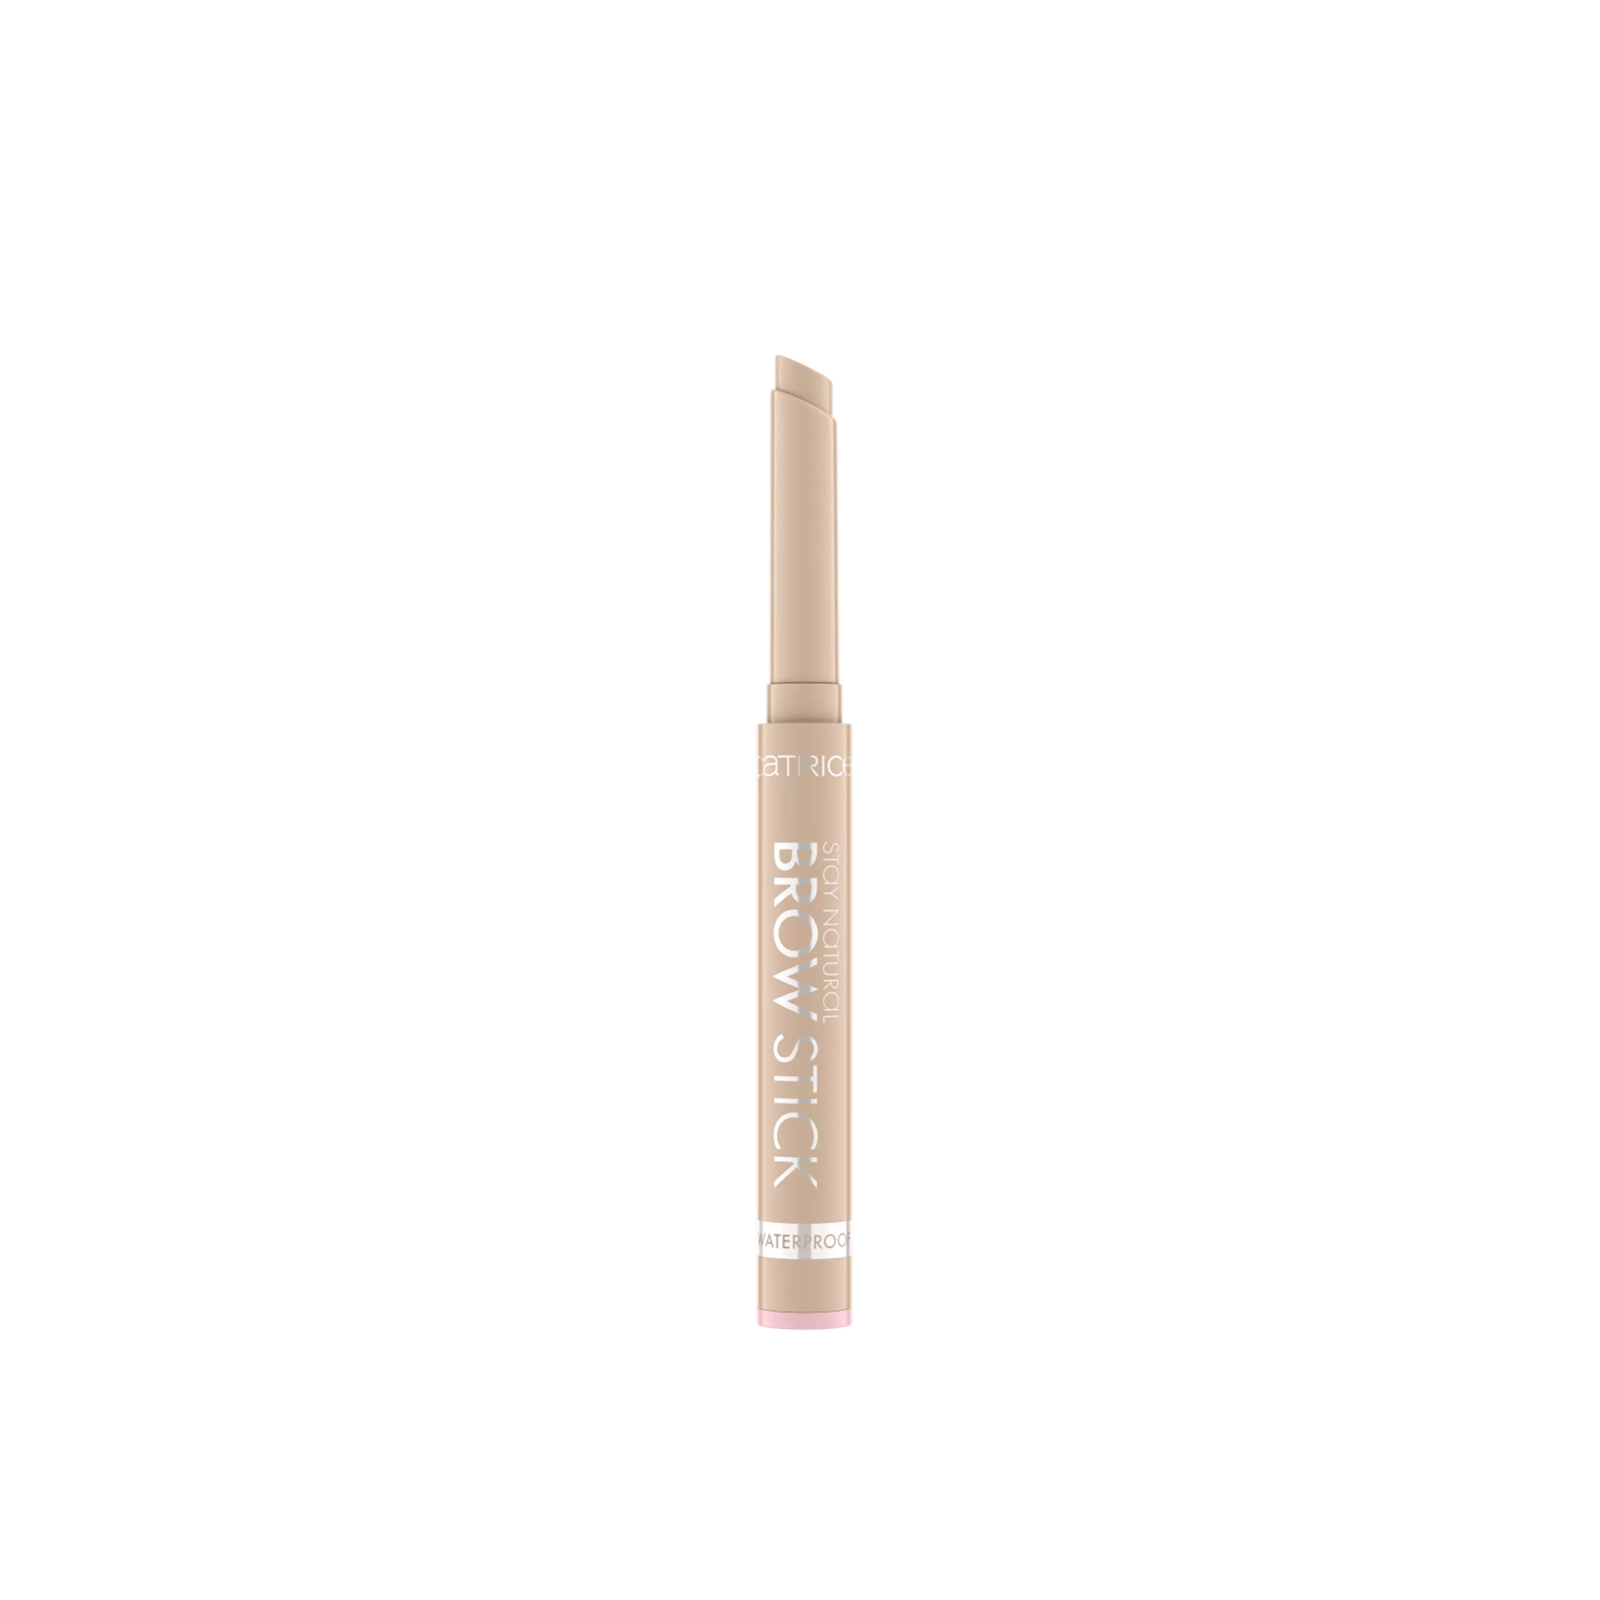 Catrice Stay Natural Waterproof Brow Stick 010 Soft Blonde 1g